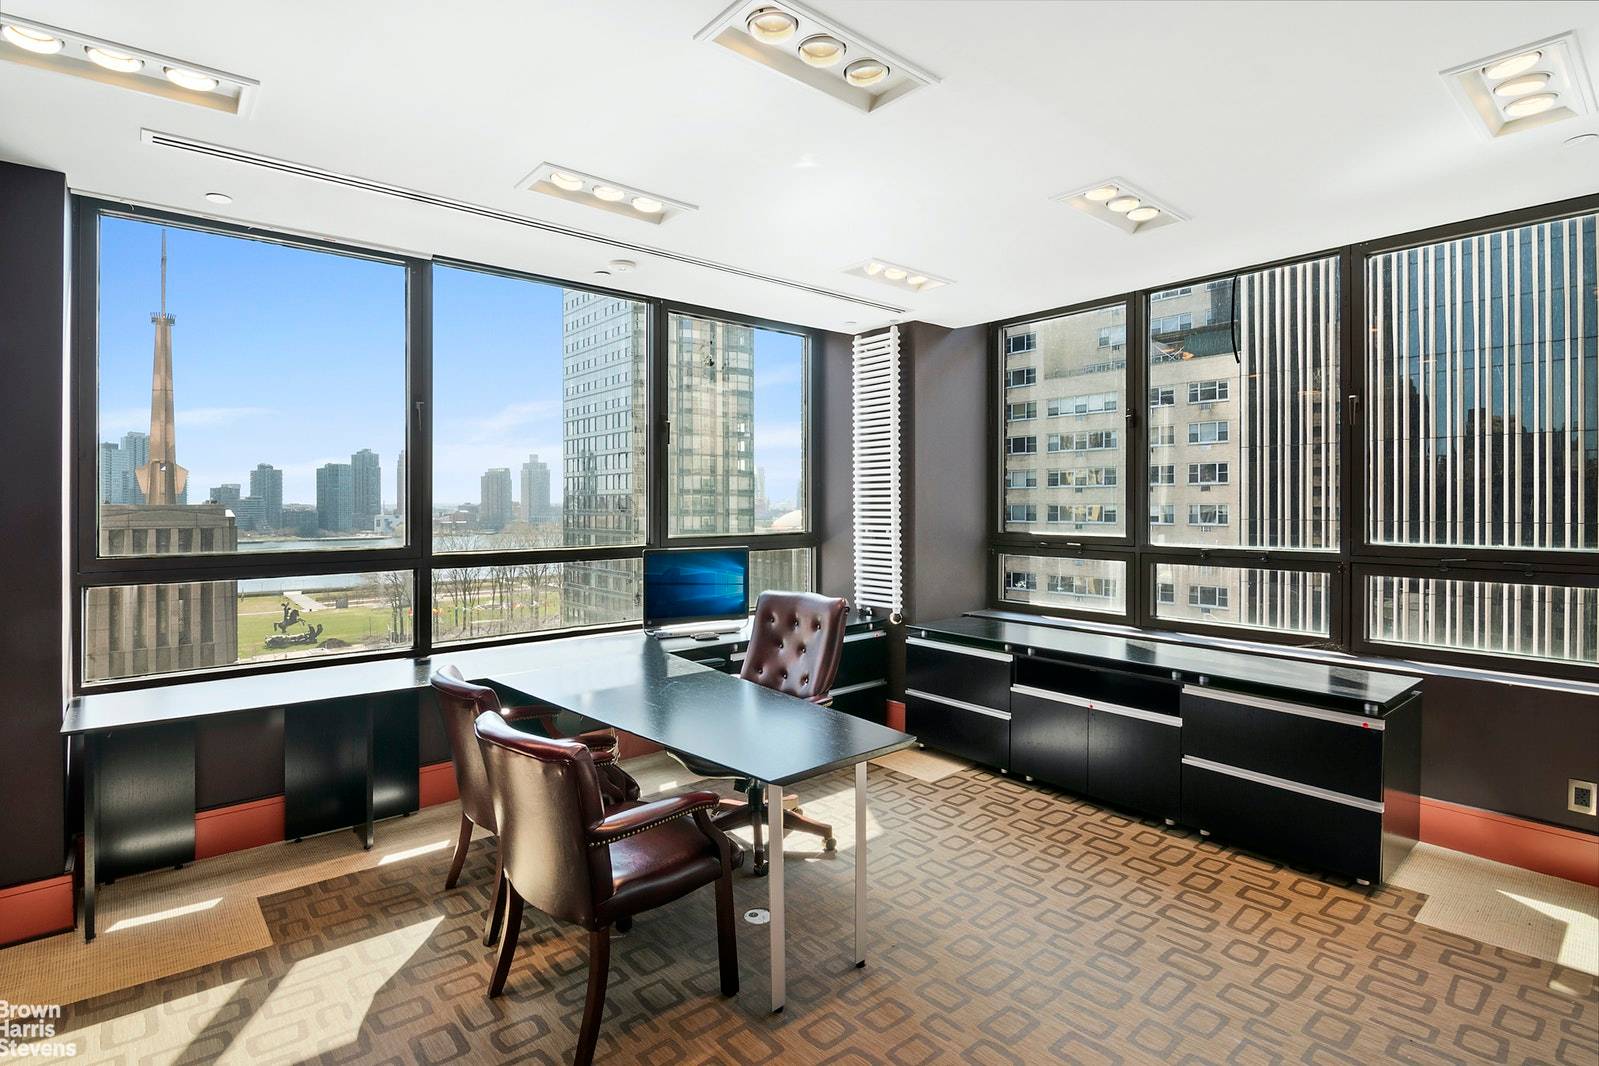 Brown Harris Stevens has been retained on an exclusive basis with the marketing of 305 East 47 Street, Units 9A BIncredible office opportunity can be found on the 9th floor ...